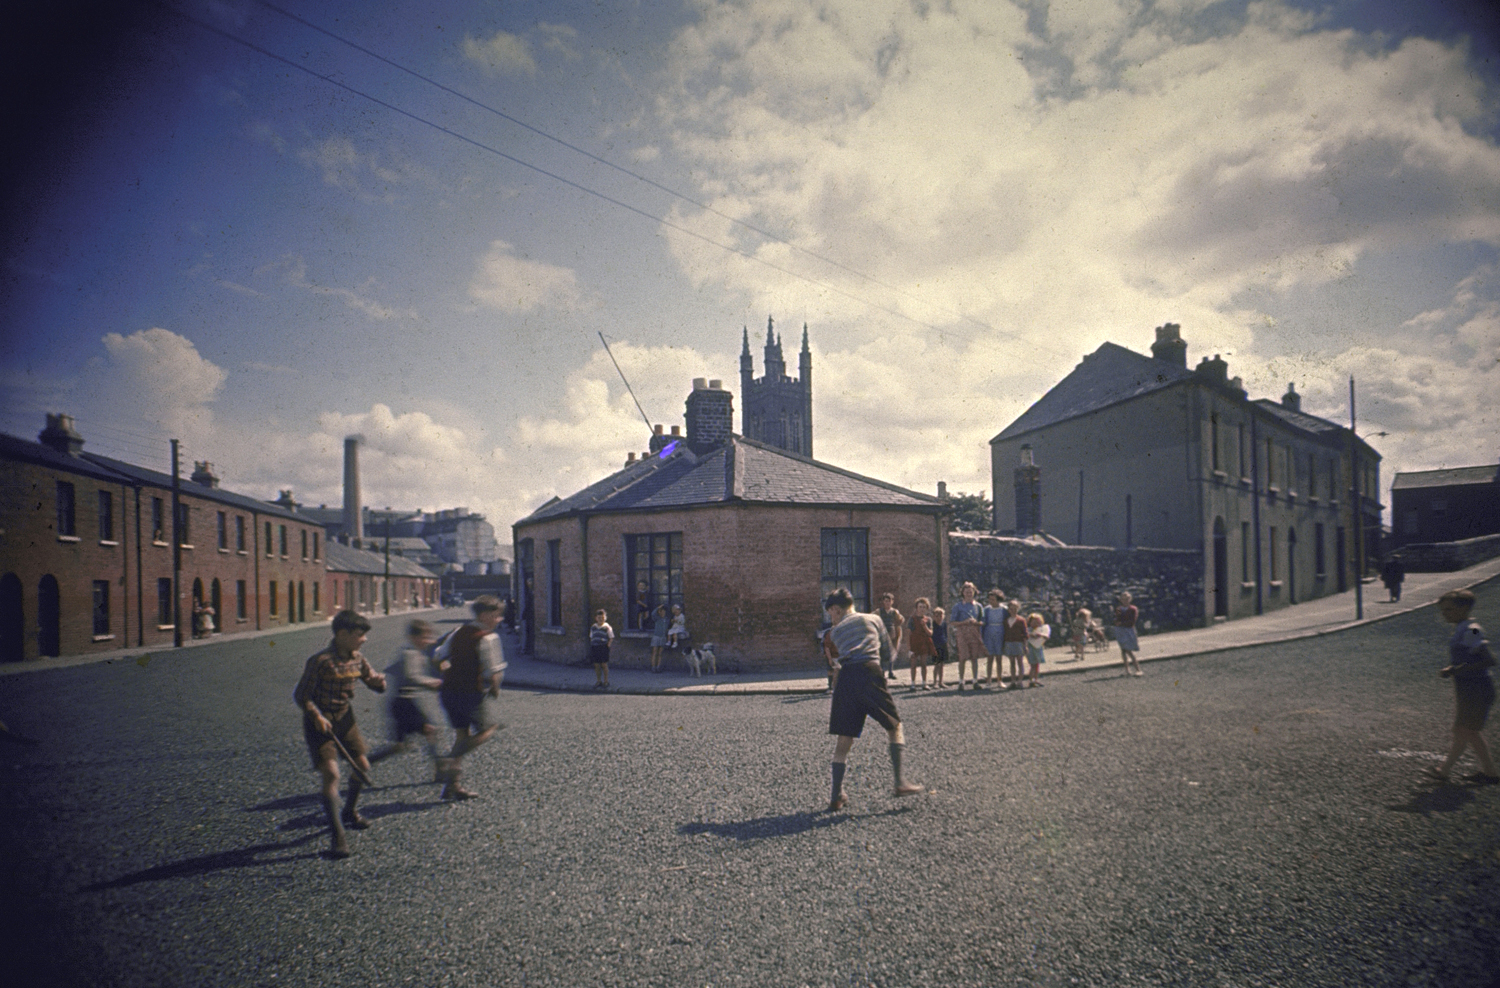 On Abercorn Road the house where O'Casey lived still stands—No. 18, second house in street at right. The boys play hurley, similar to hockey, which O'Casey too played 60 years ago